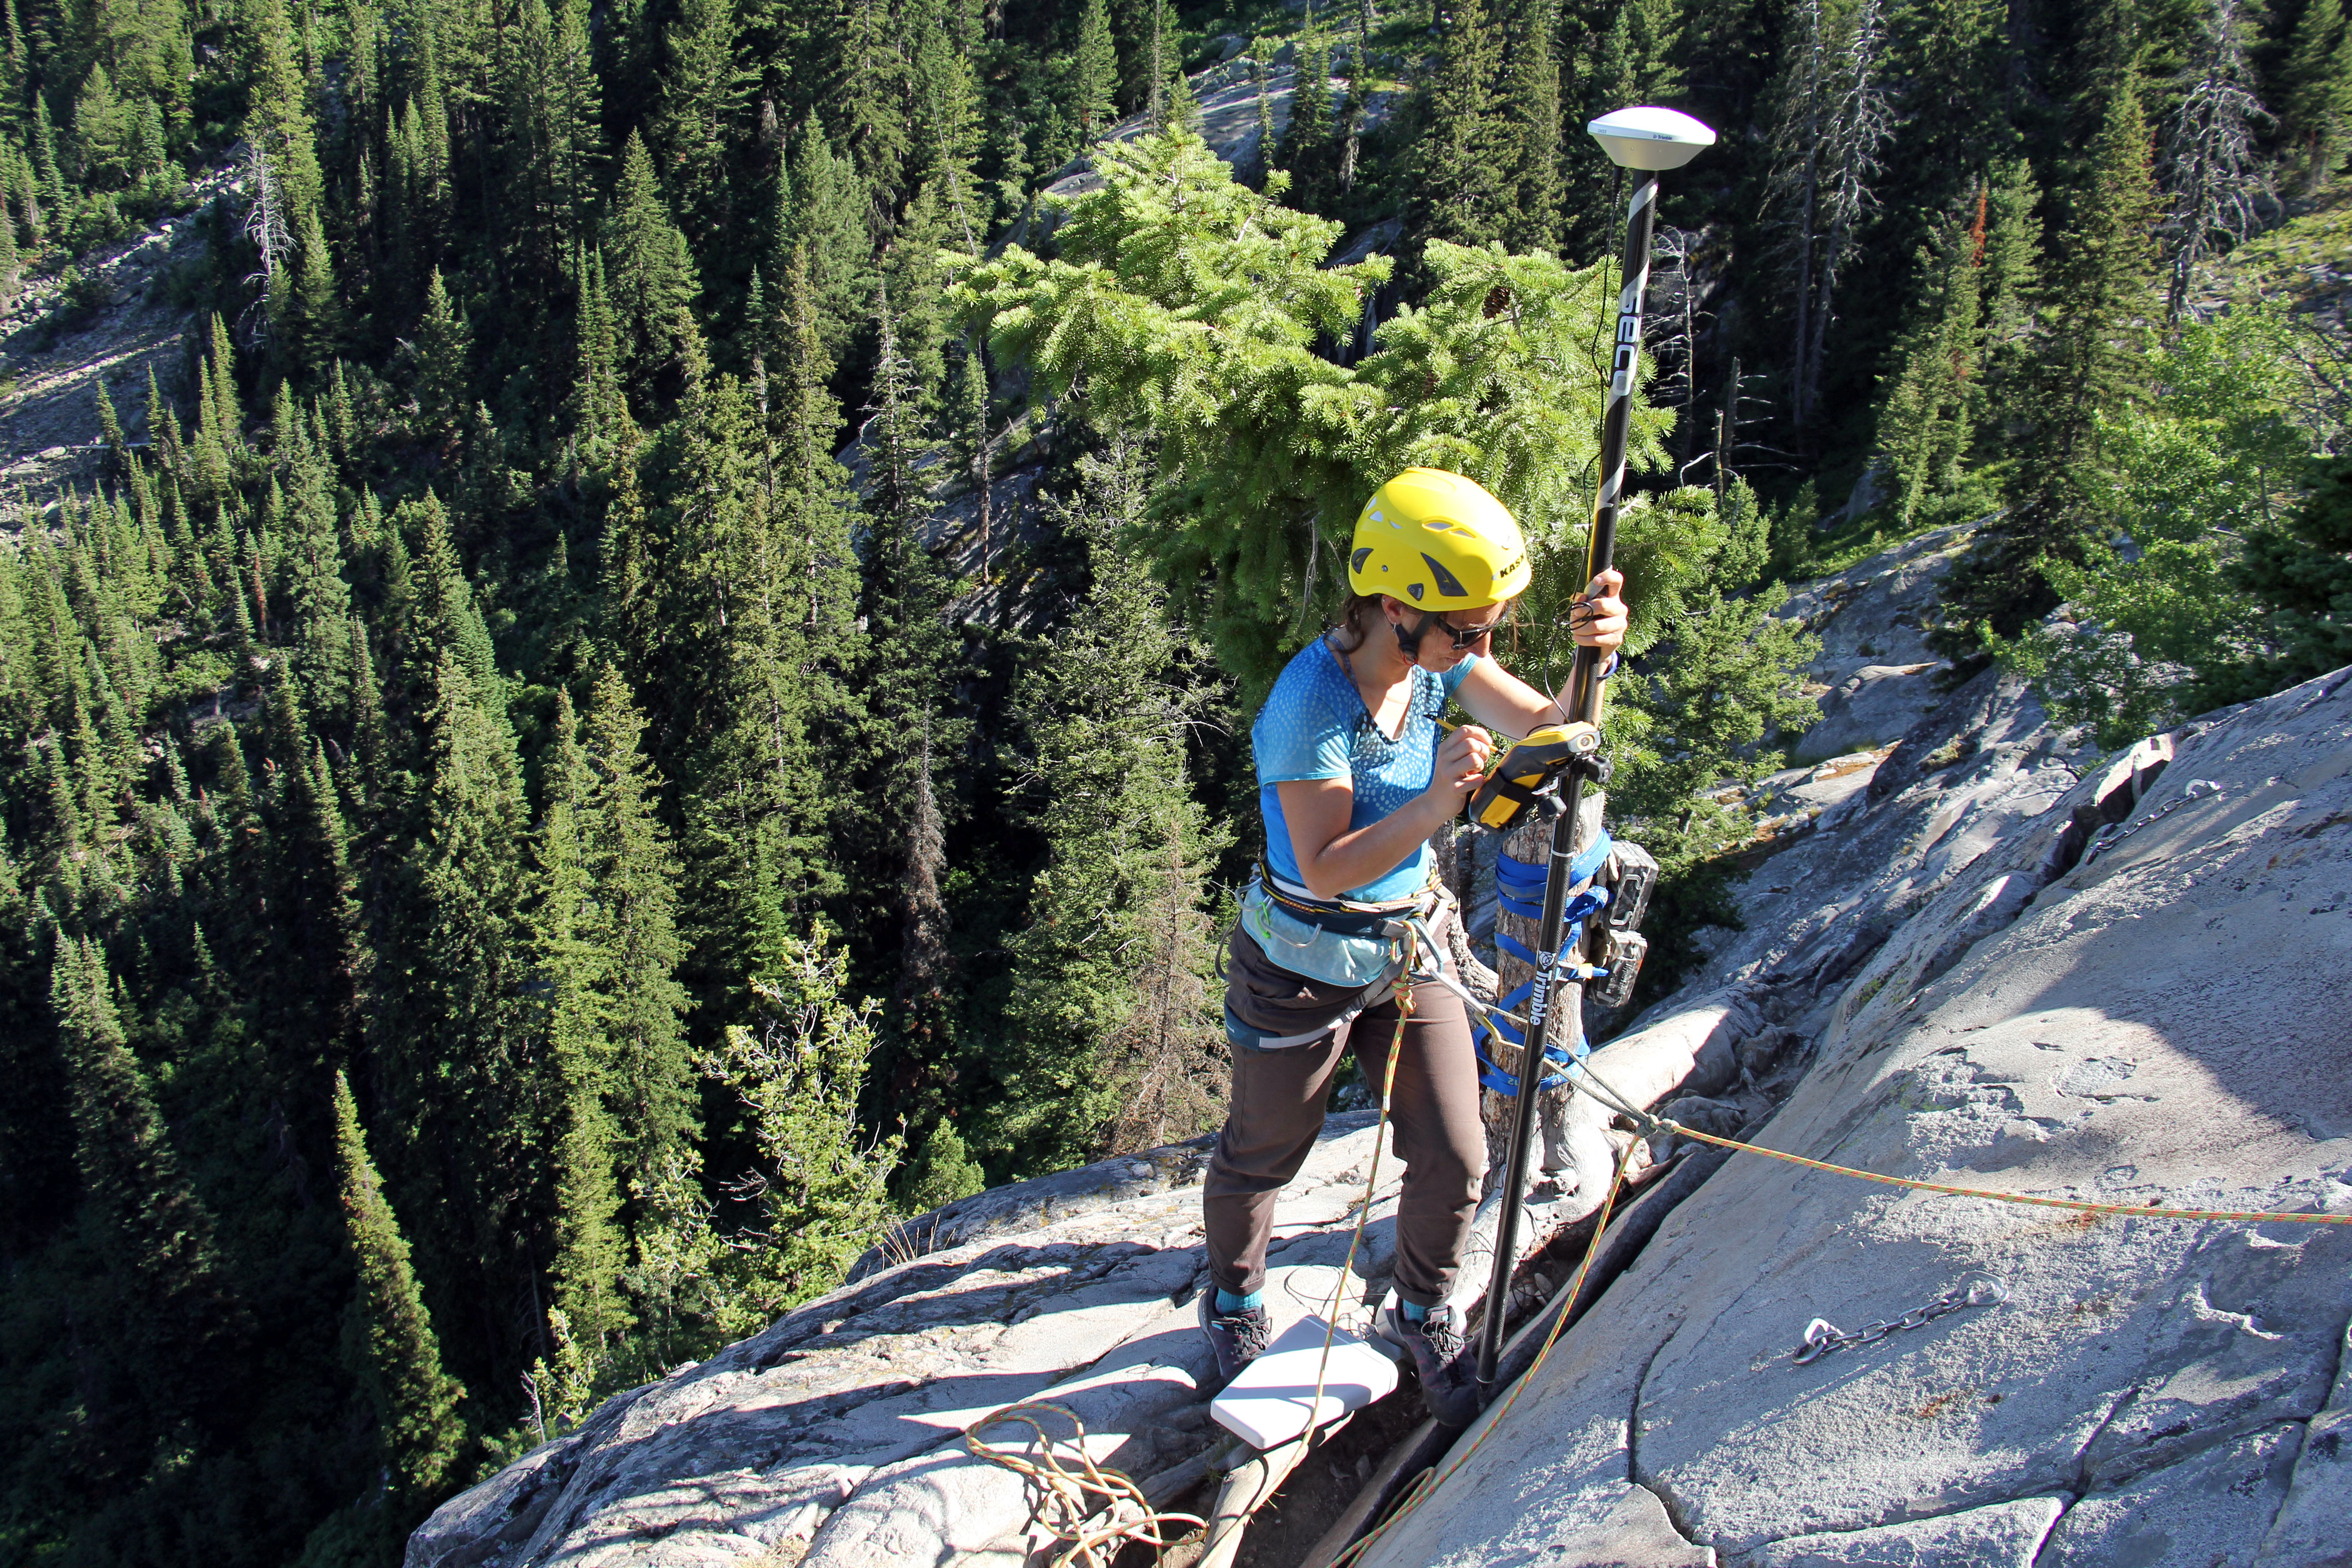 A Grand Teton National Park physical scientist takes a GPS reading along the crack in the rock buttress.